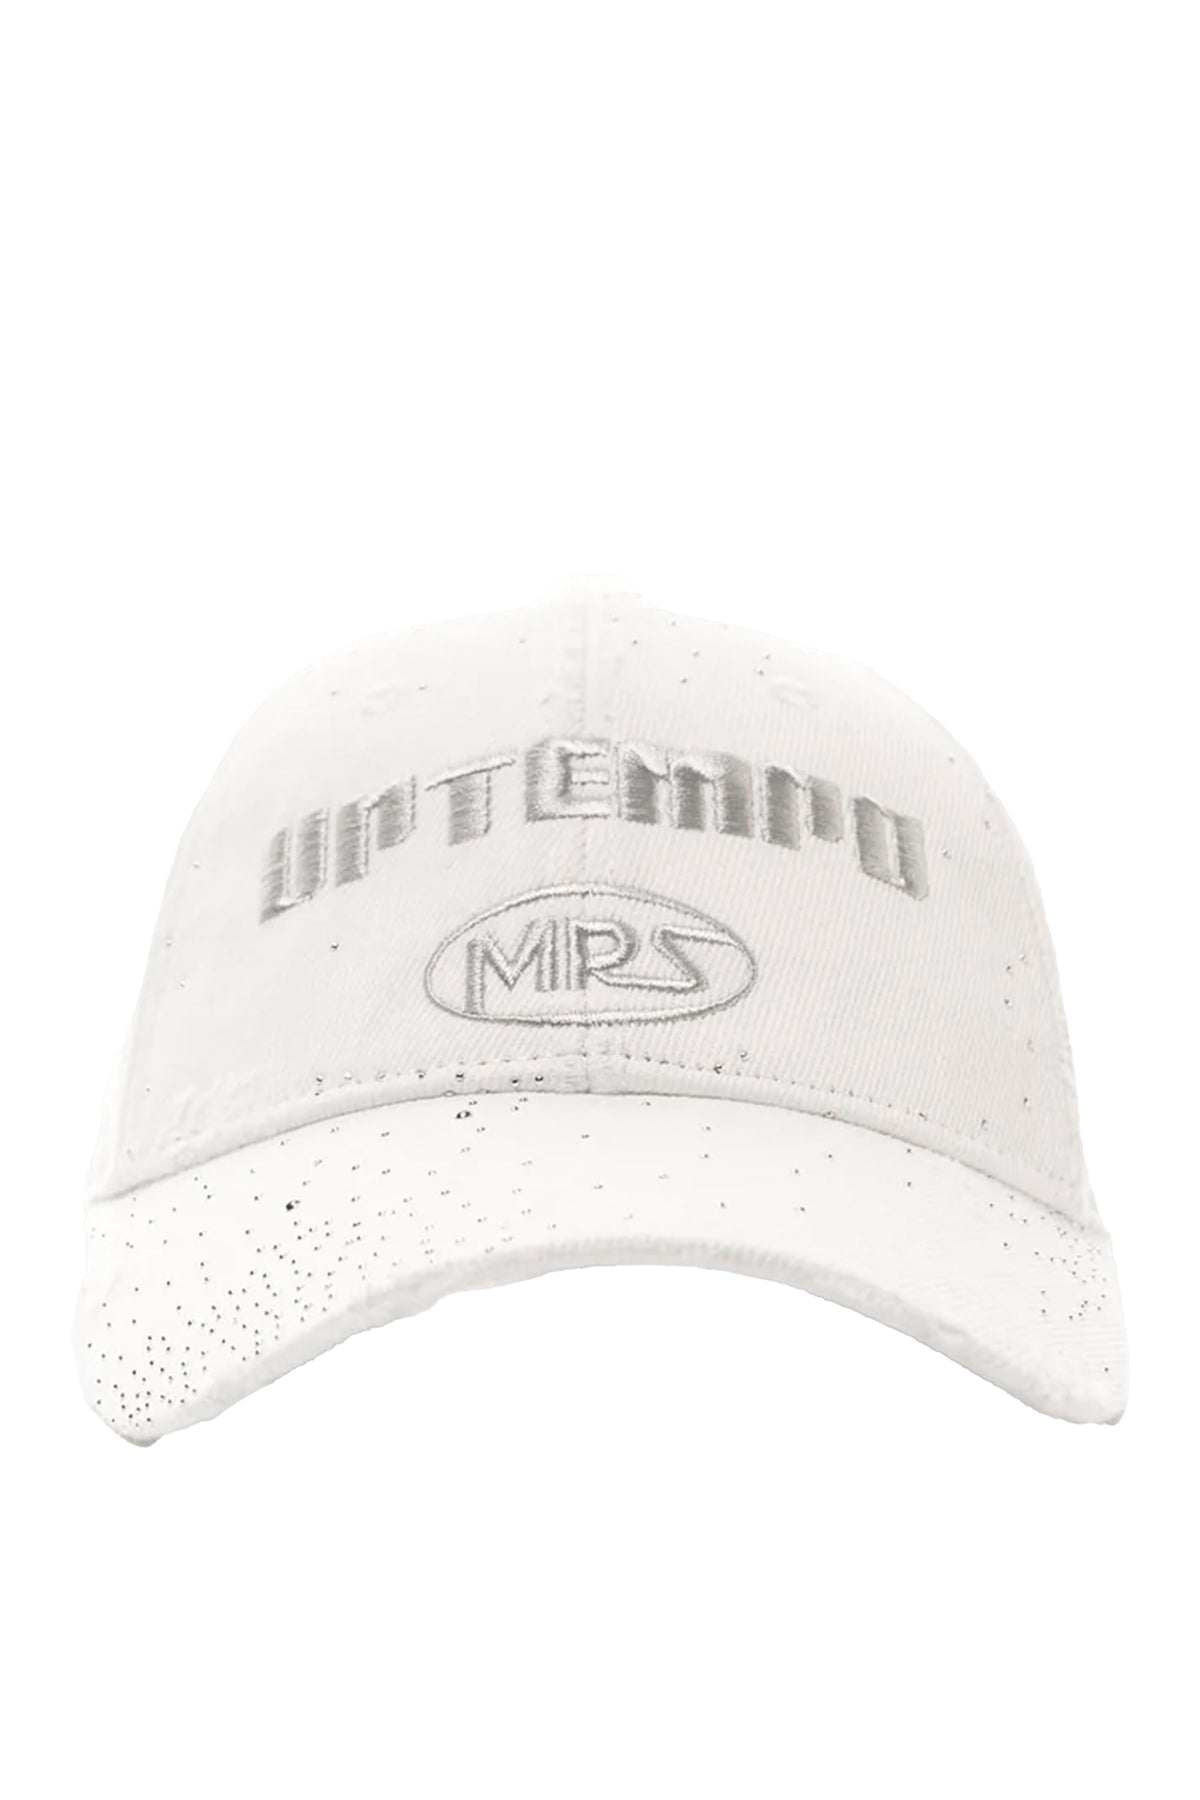 ROLLED BACK CAP / WHT